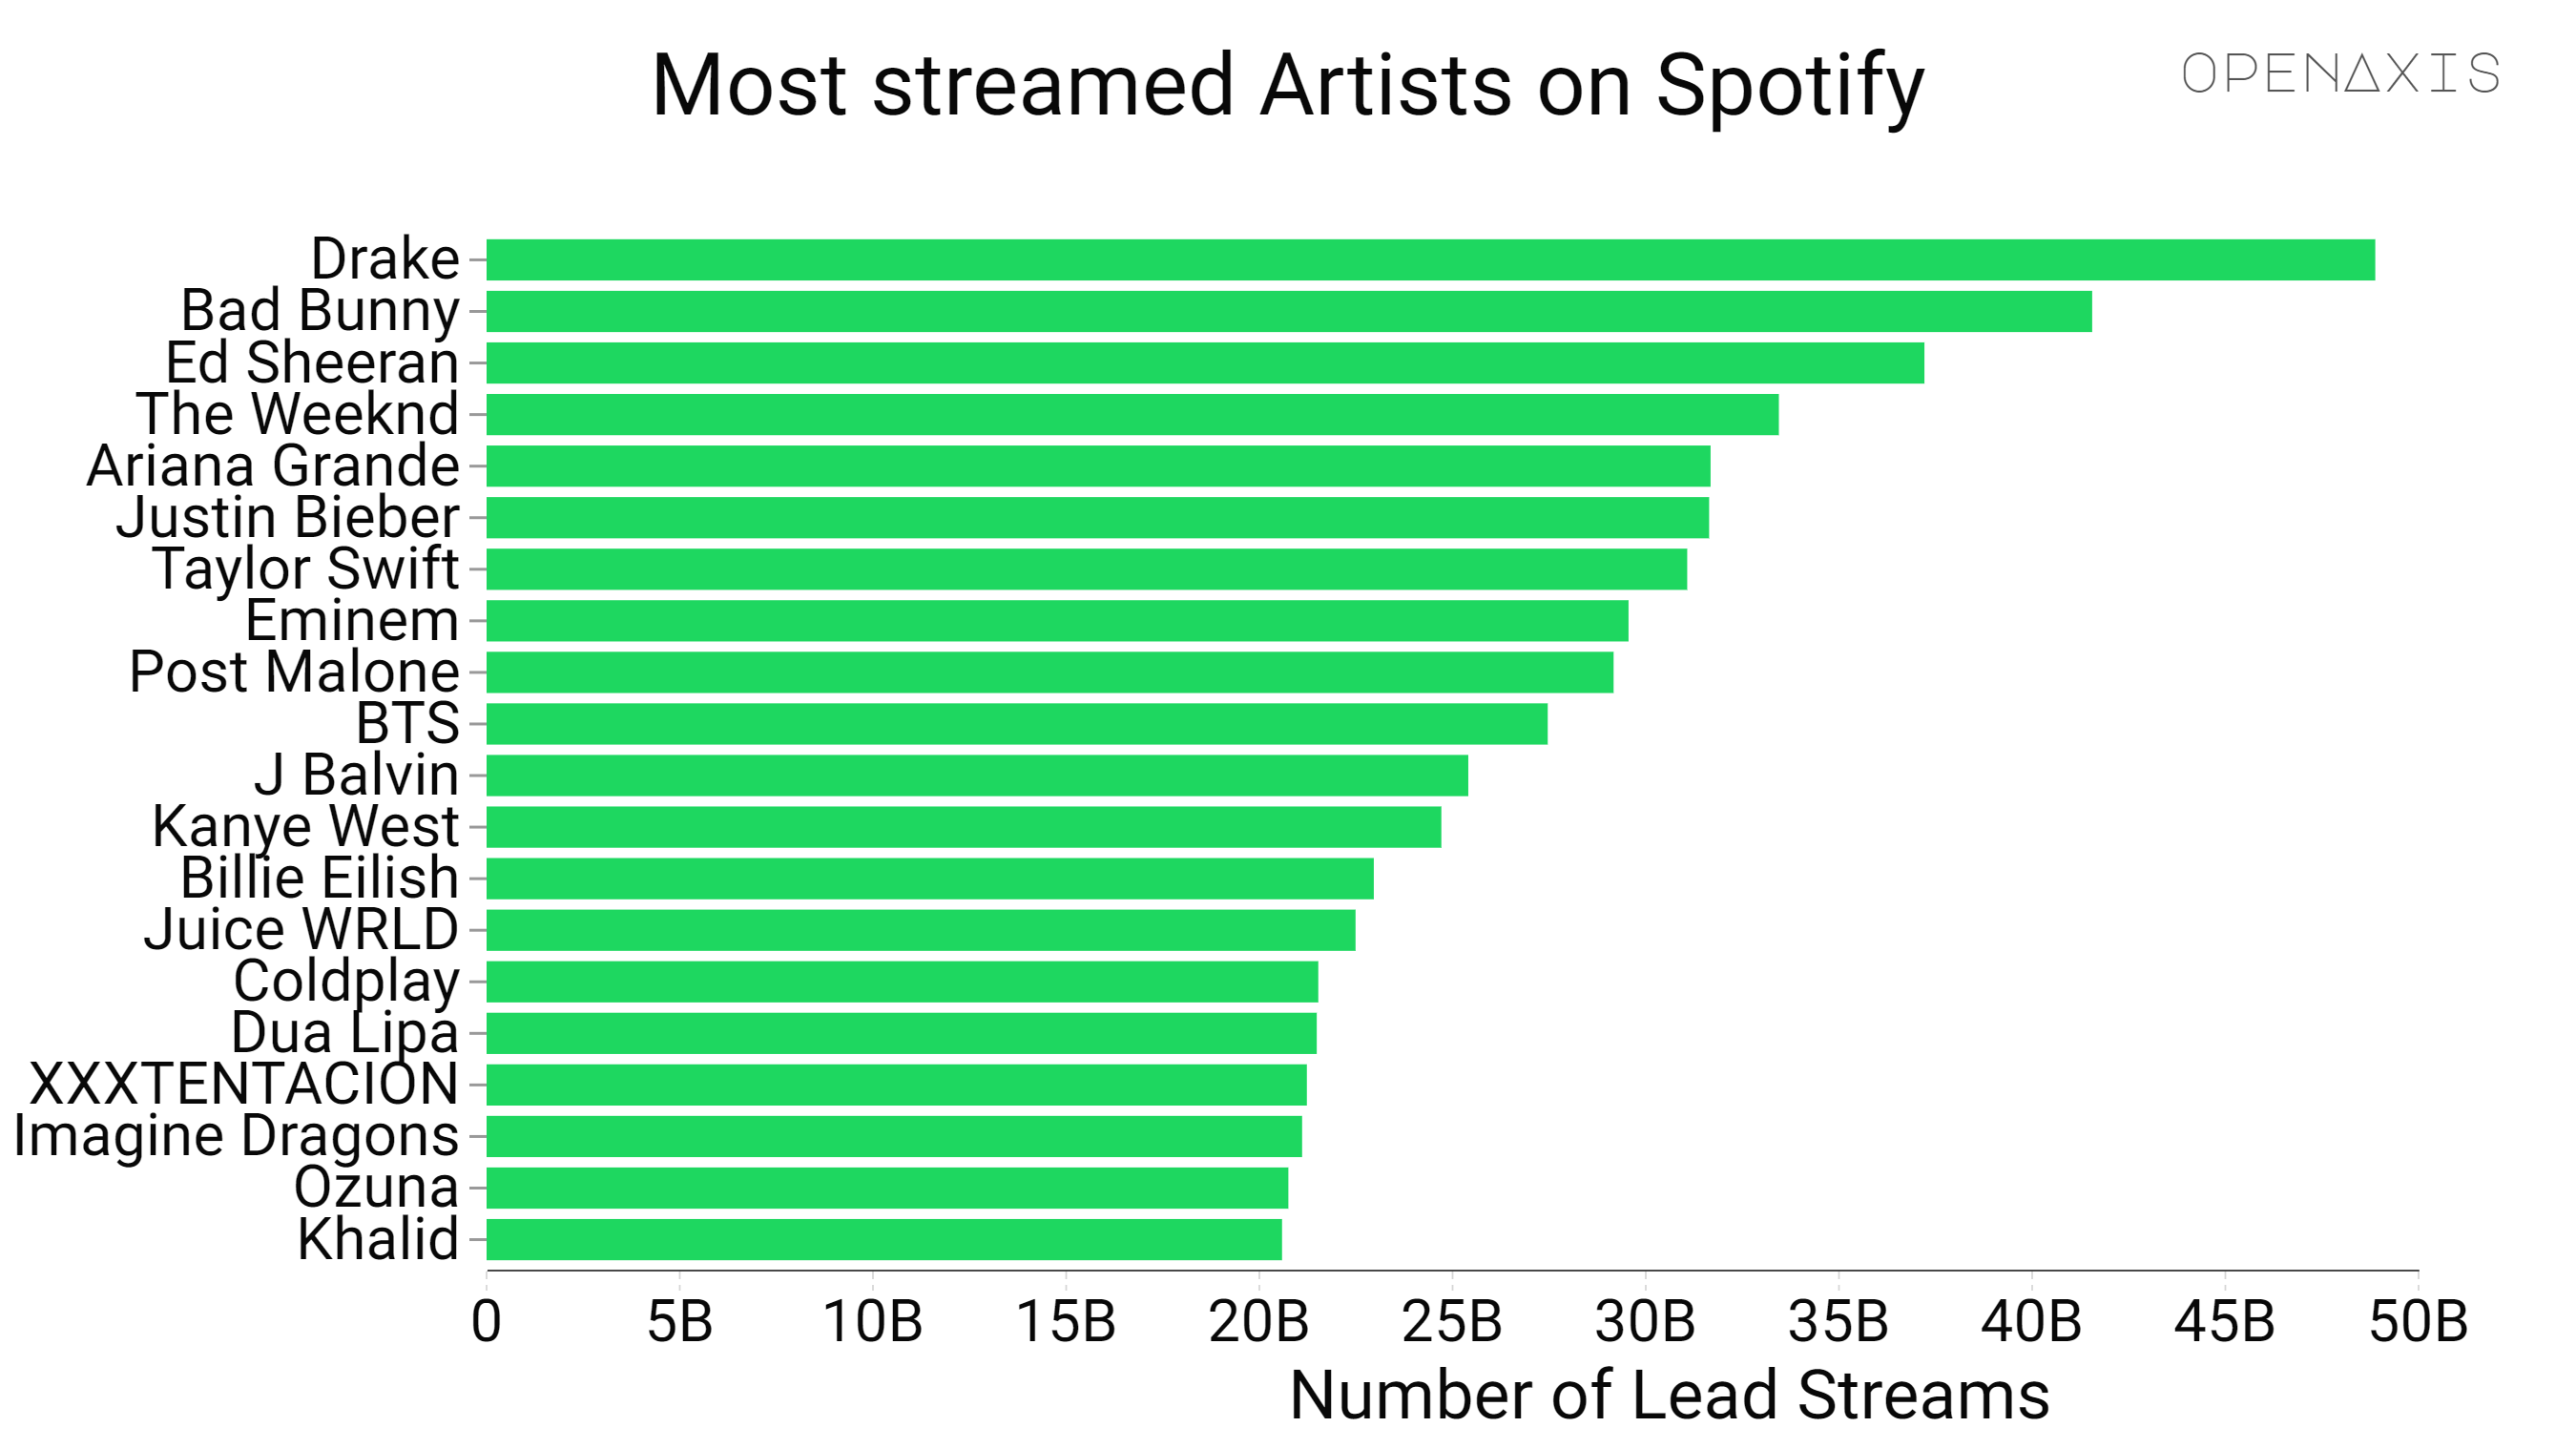 <p>This ranking presents the top Spotify artists based on streams from tracks available inside their personal page’s sections Albums, Singles and Compilations. They are combined together and defined as “Lead streams”.</p><p><br /></p><p>Top 6 includes three Canadians! </p><p><br /></p><p>﻿<a href="/search?q=%23music" target="_blank">#music</a>﻿ ﻿<a href="/search?q=%23entertainment" target="_blank">#entertainment</a>﻿</p><p><br /></p><p>Source: <a href="/data/4044" target="_blank">ChartMasters.org</a></p><p><br /></p>